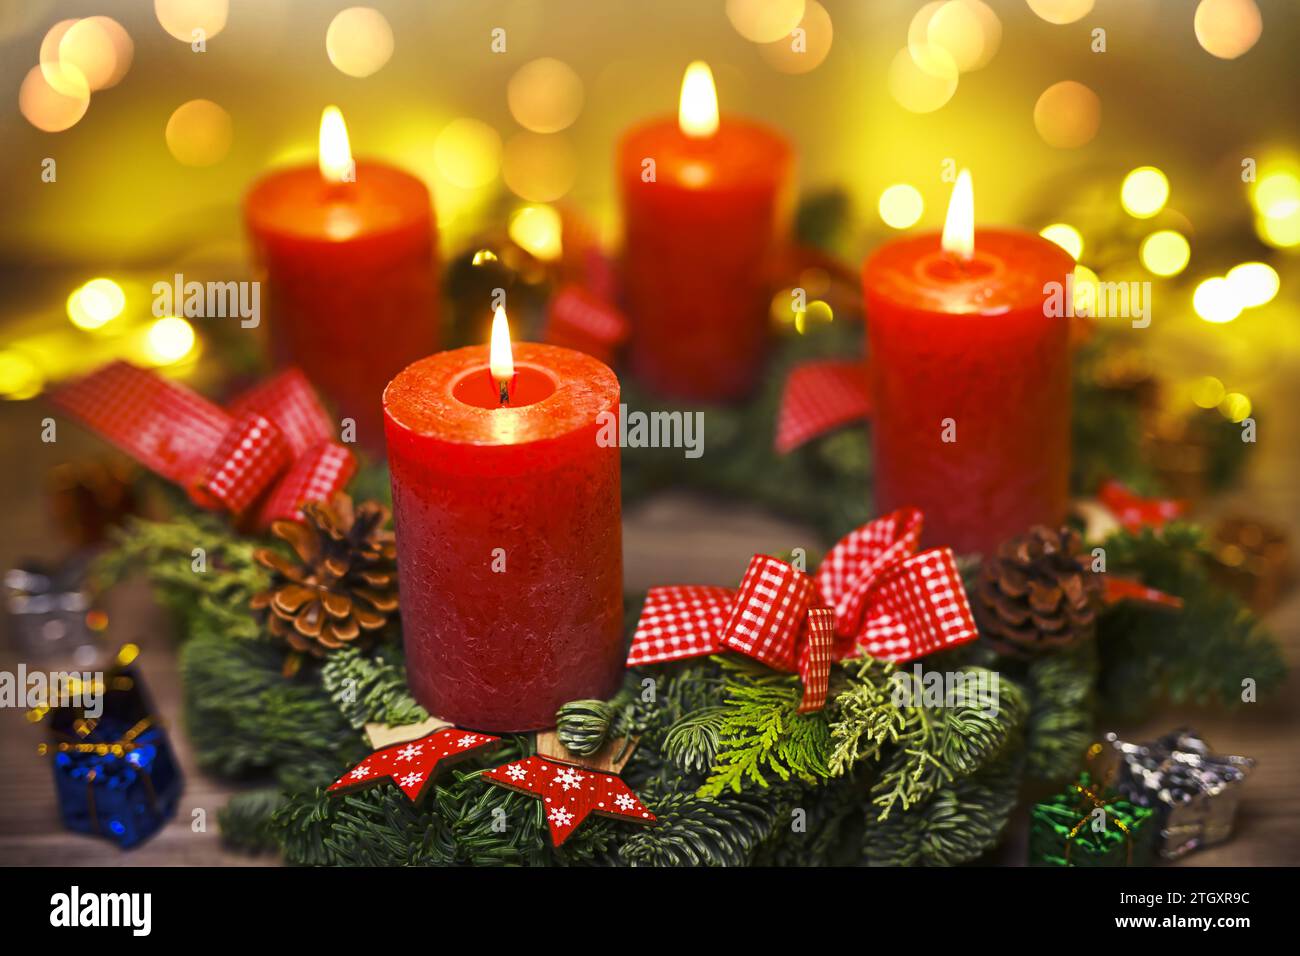 Advent Wreath With Four Burning Candles Stock Photo